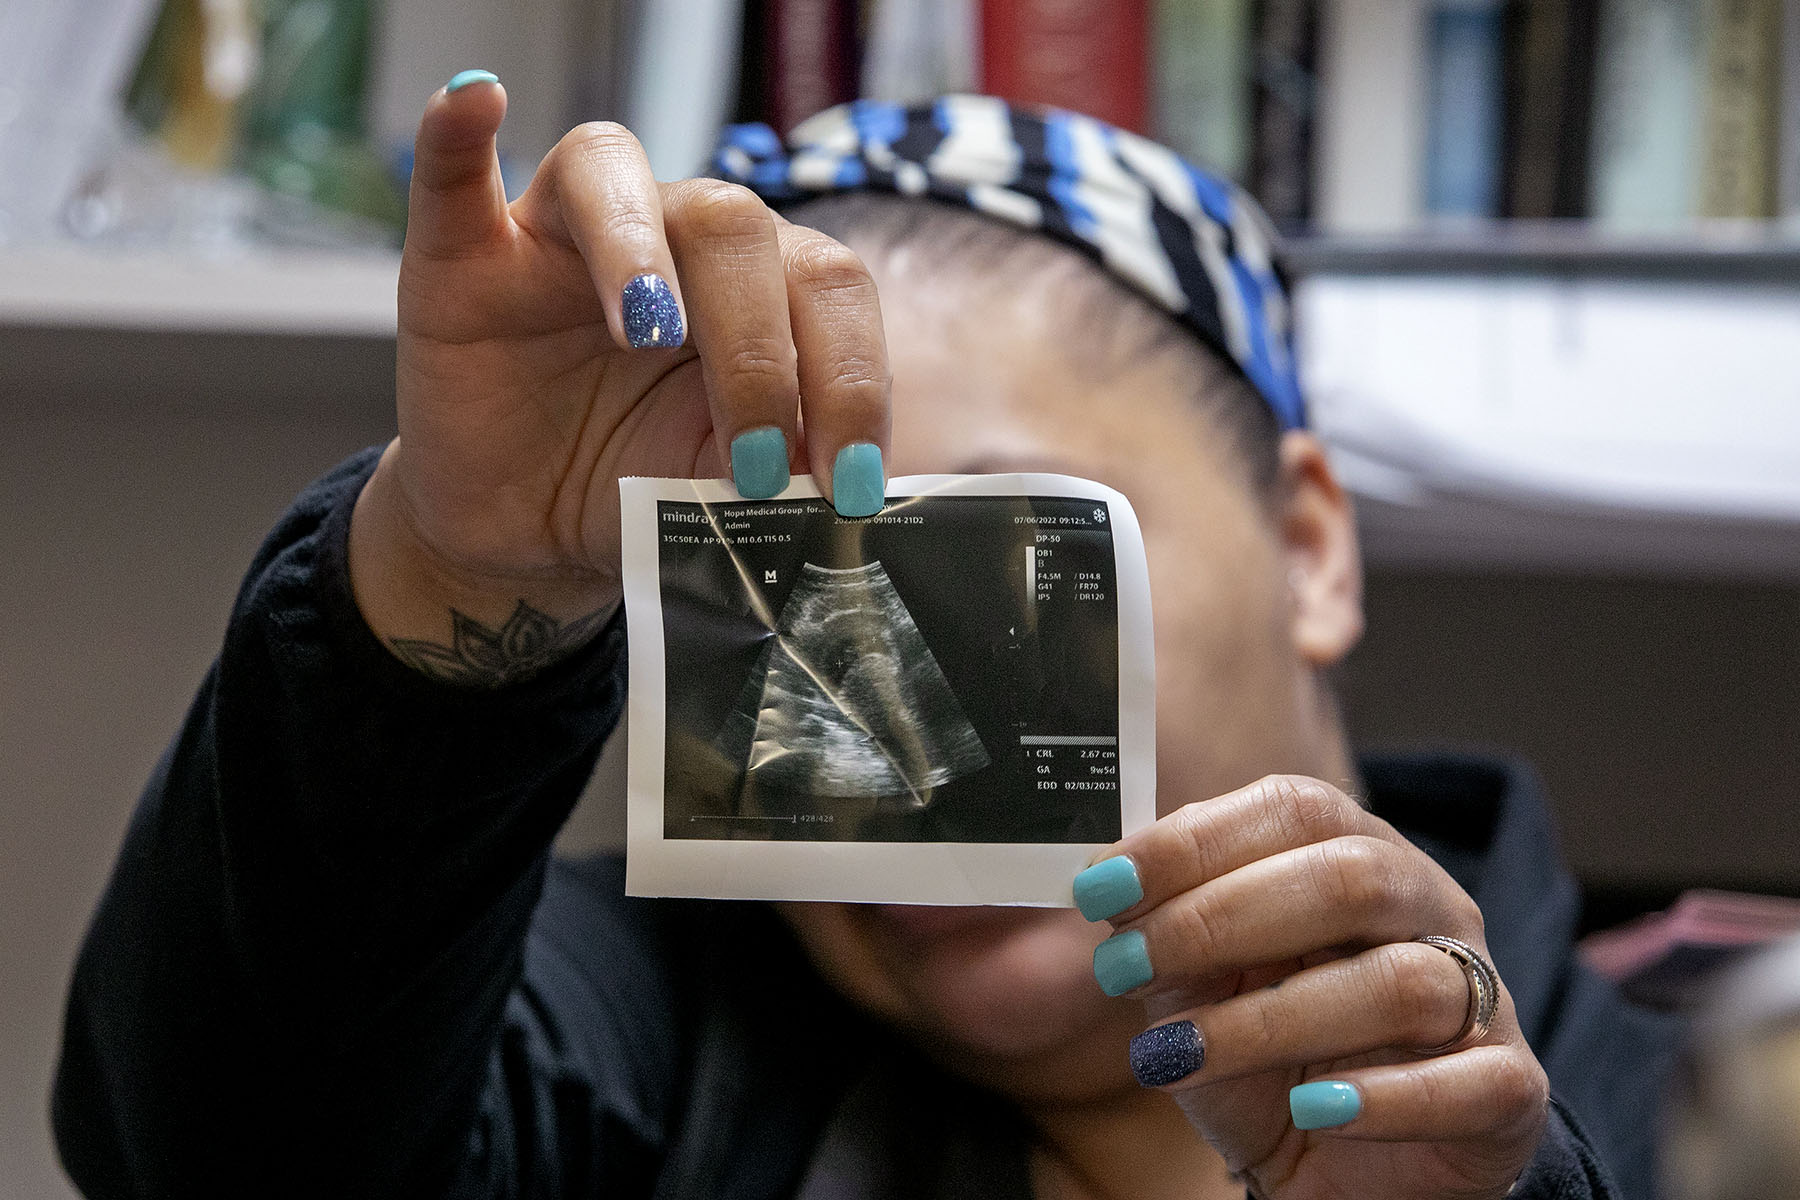 A patient seeking an abortion at Hope Medical Group for Women in Shreveport, Louisiana, holds up her ultrasound photo showing she is just over nine weeks pregnant.